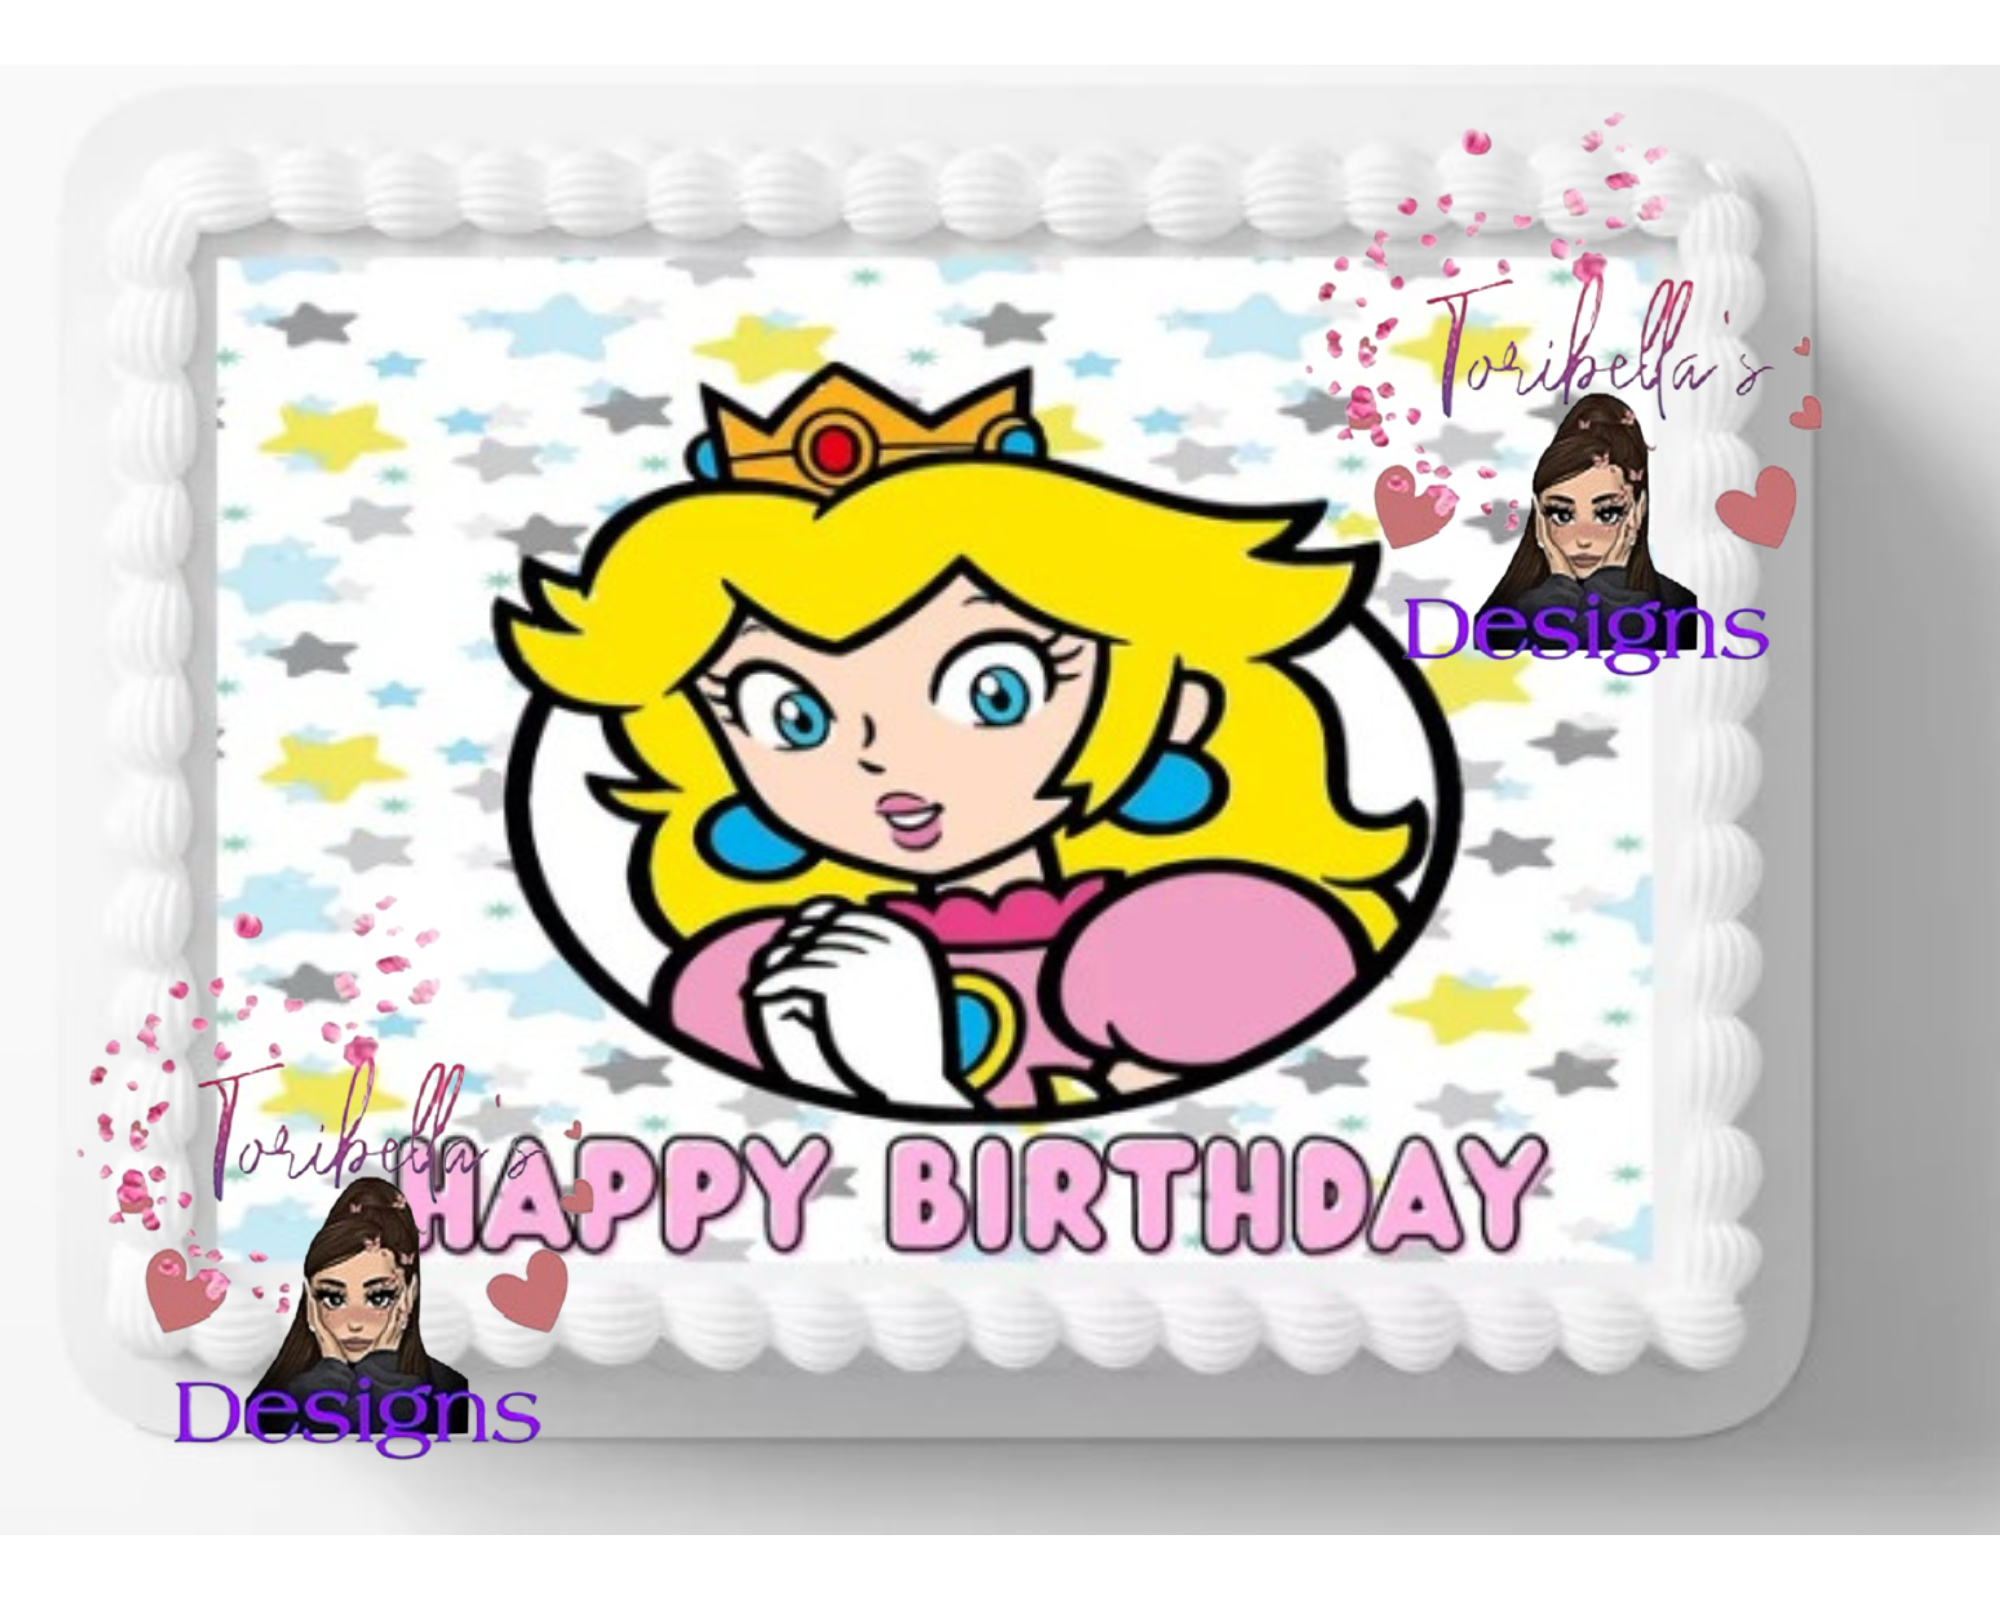 Princess Peach Video Game Design Edible Image Edible Cake Topper Edible Cake Decorations You Add To Your Own 1/4 to 1/2 Sheet Cake Diy Cakes Gamer Design - image 1 of 1